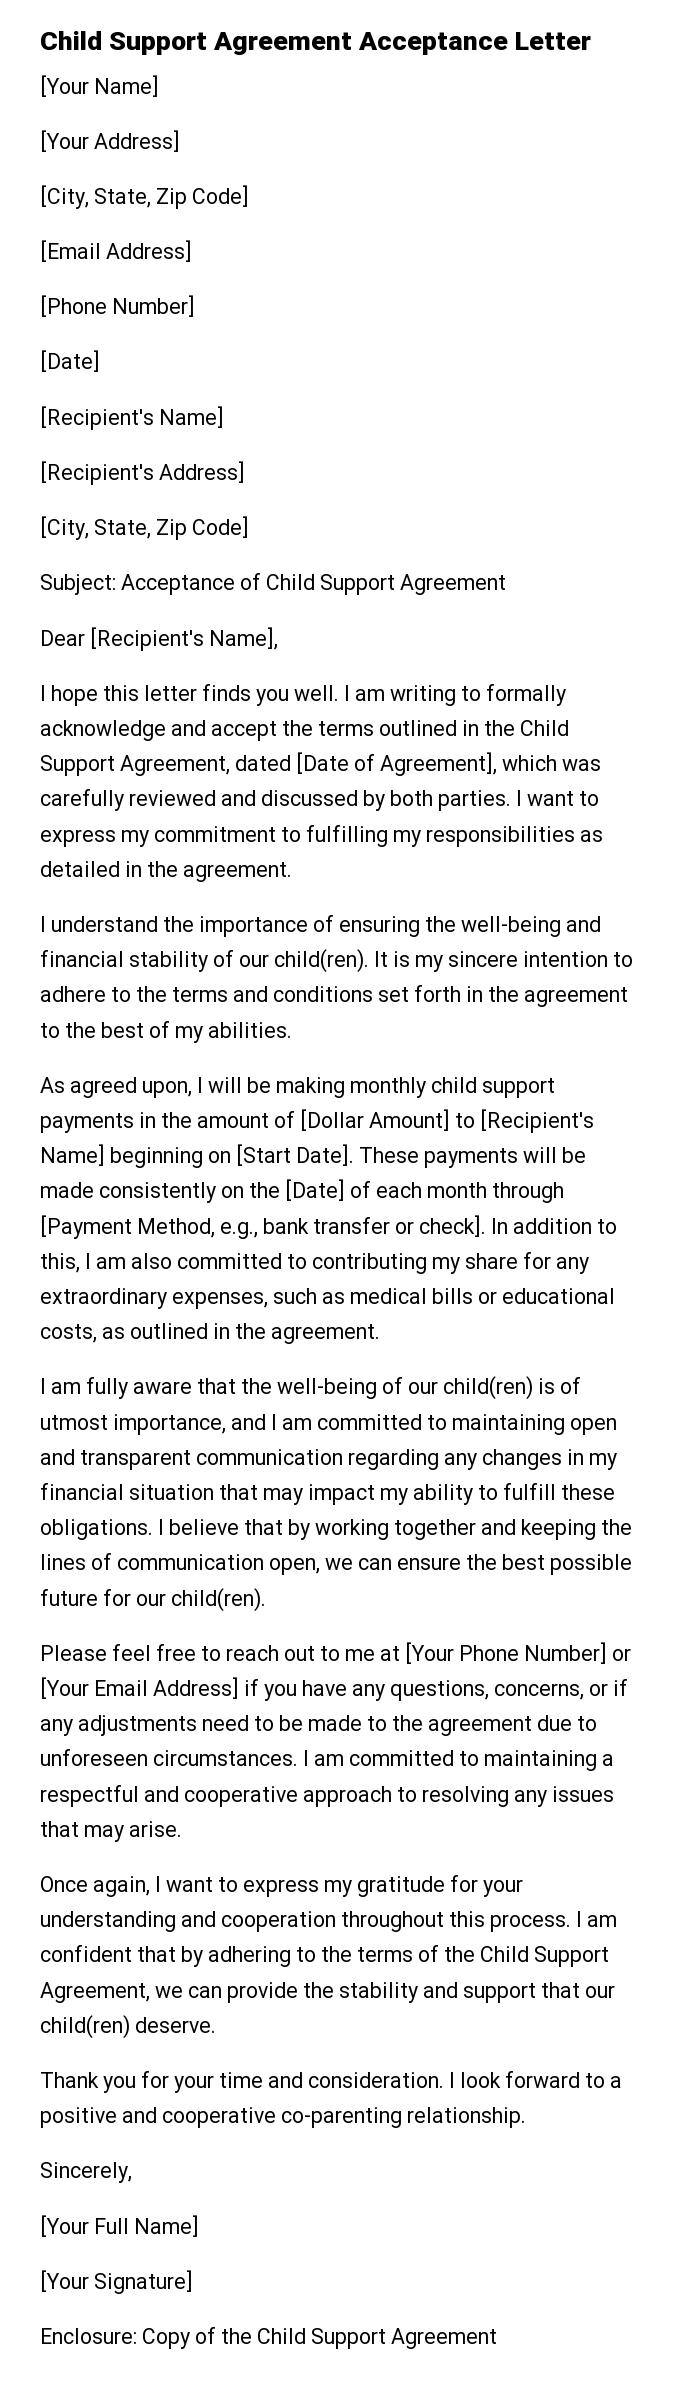 Child Support Agreement Acceptance Letter